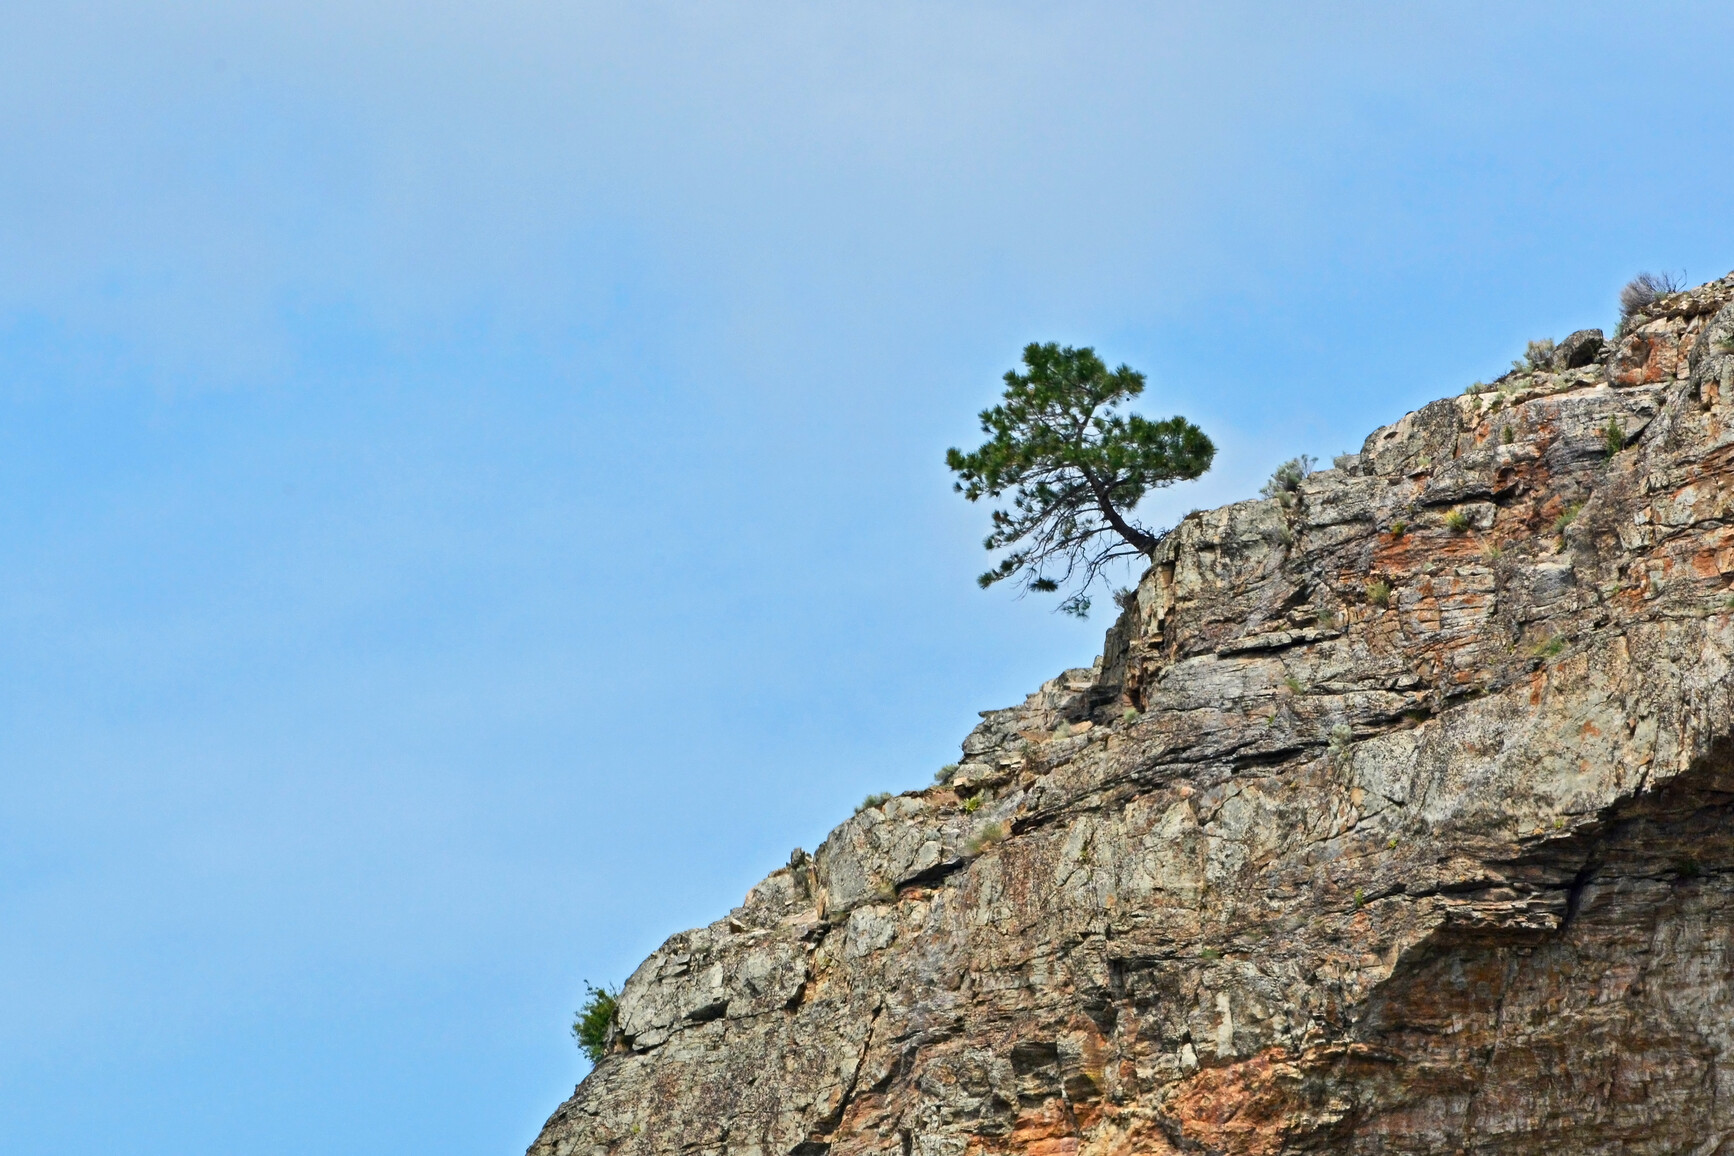 Photo of a Ponderosa pine (Pinus ponderosa) growing on the edge of a cliffside.